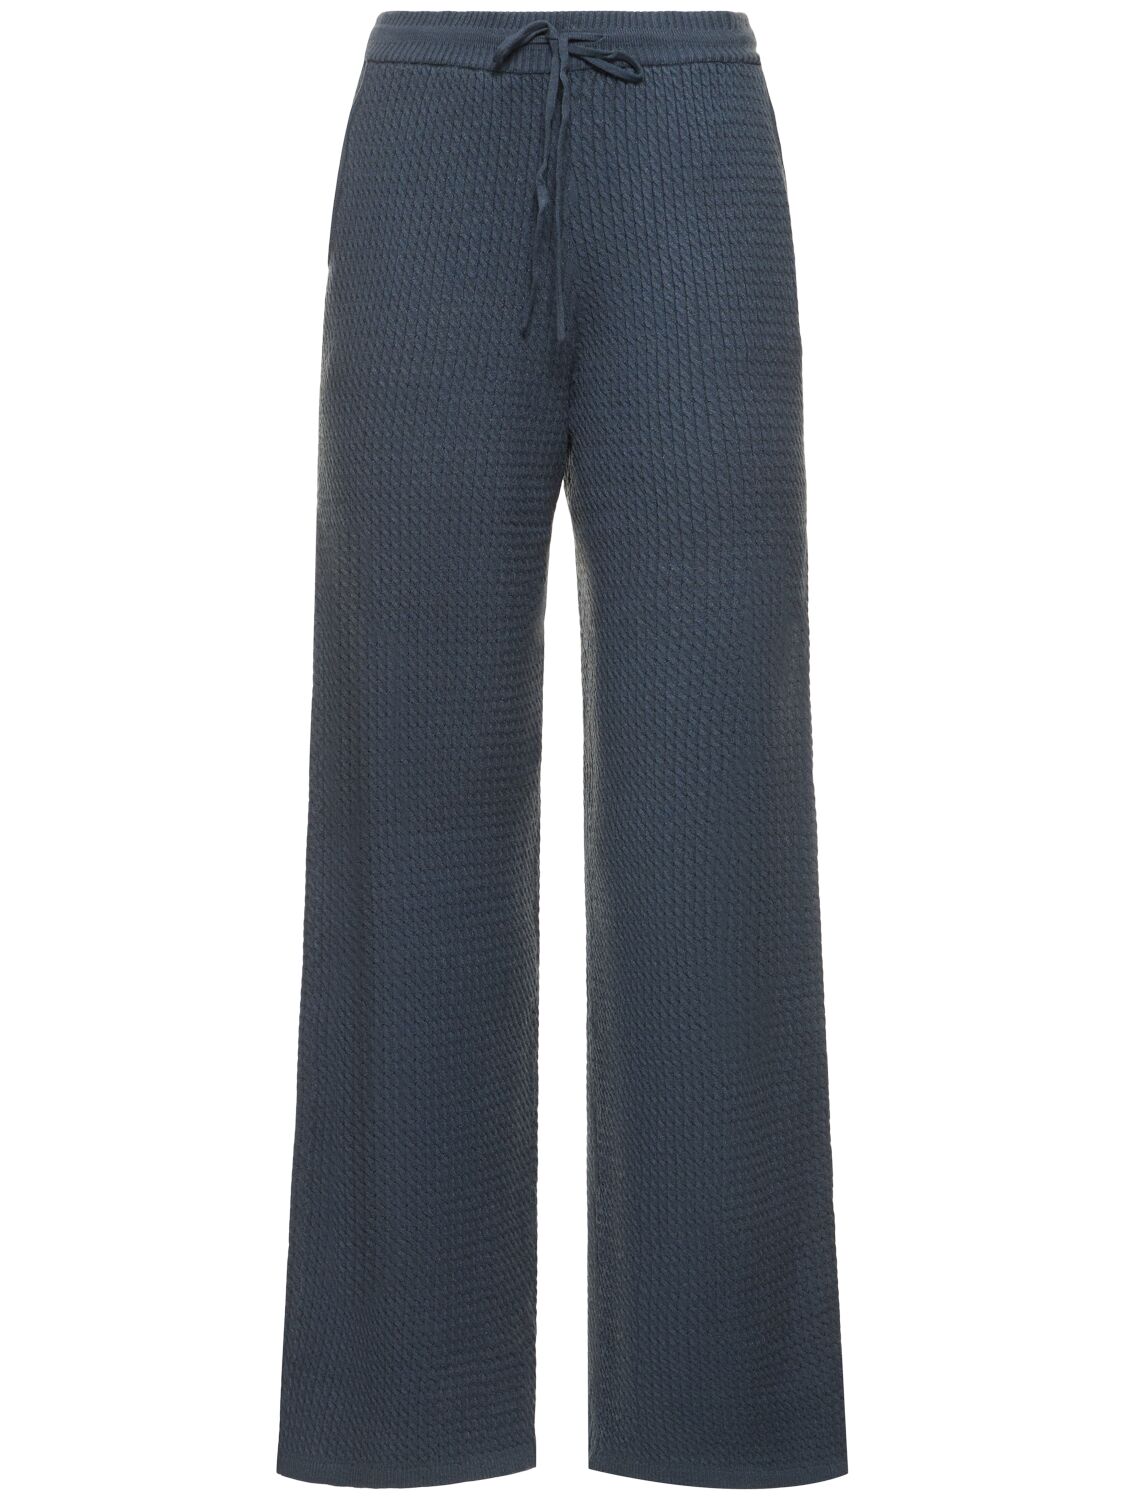 Weworewhat Pull On Knit Viscose Blend Pants In Dark Grey